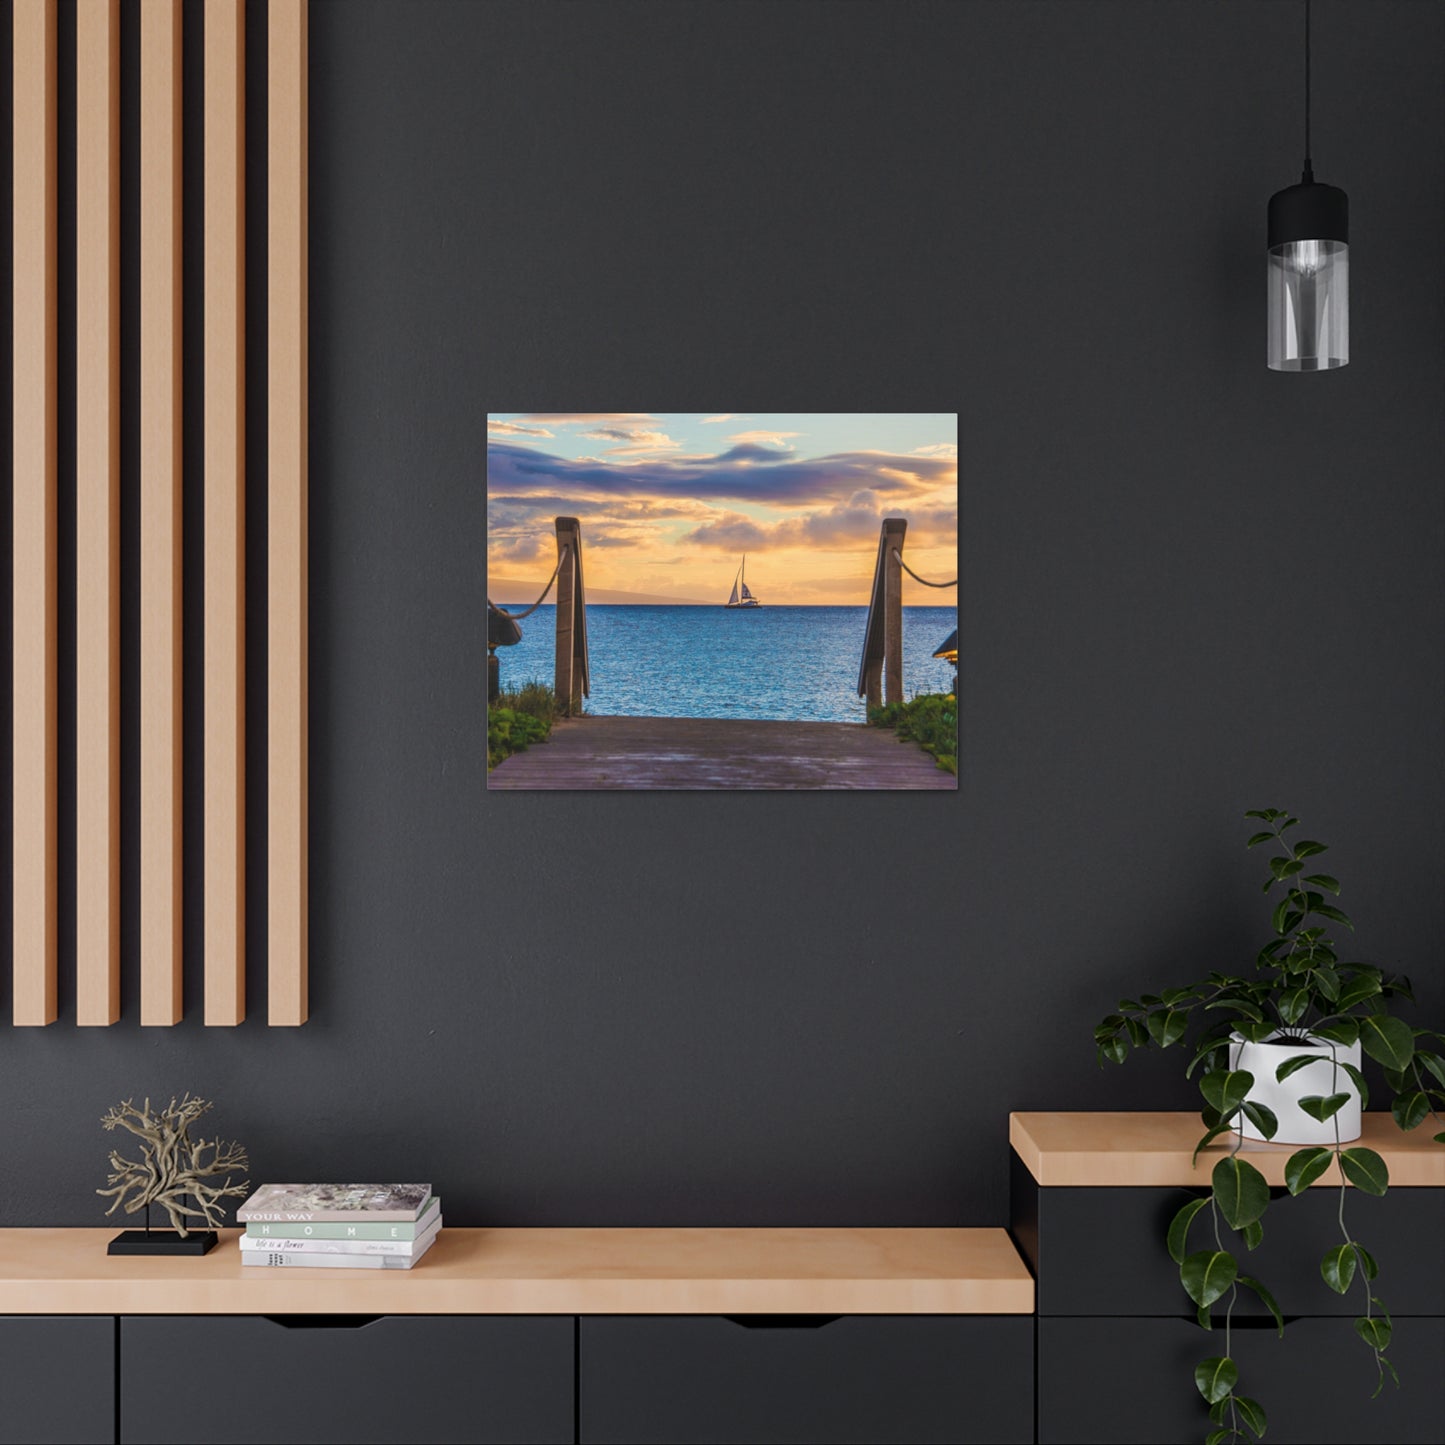 Canvas Print Of A Sailboat At Sunset in Hawaii For Wall Art